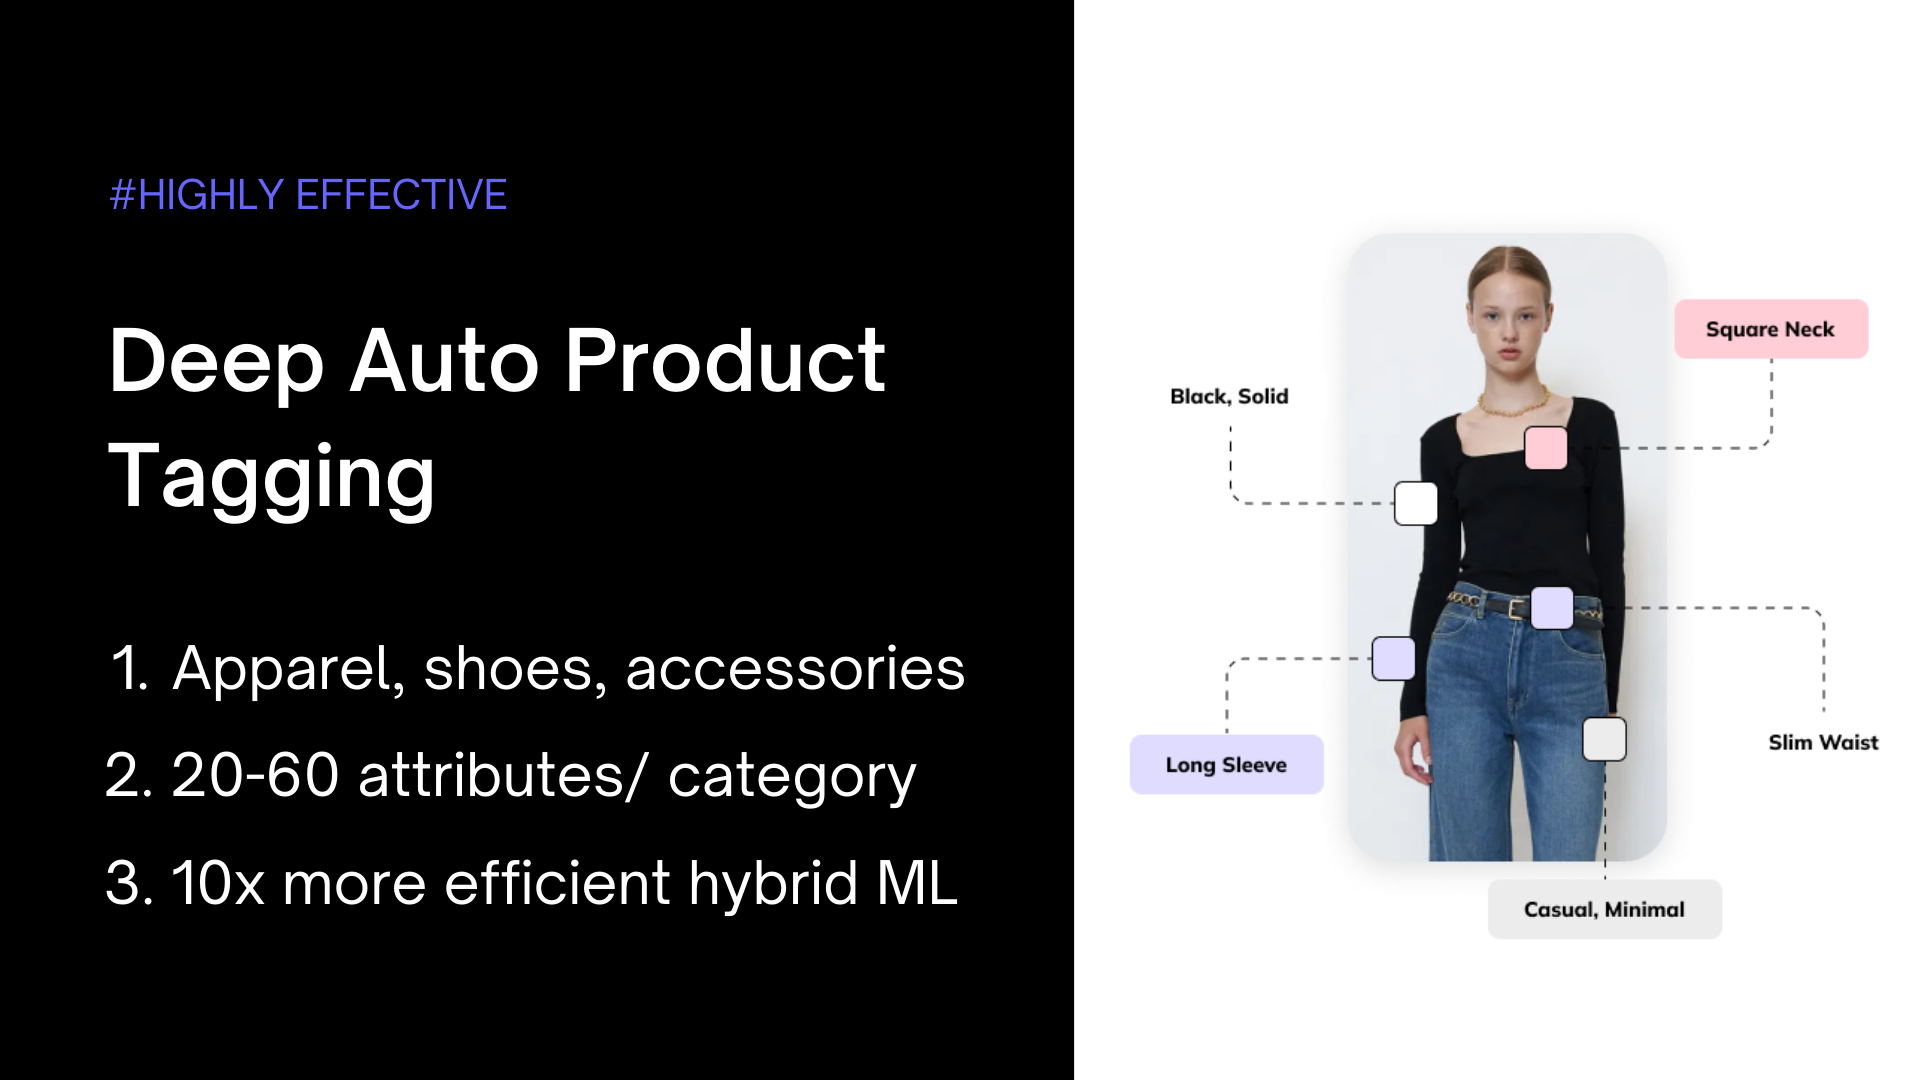 Auto Product Tagging powered by AI